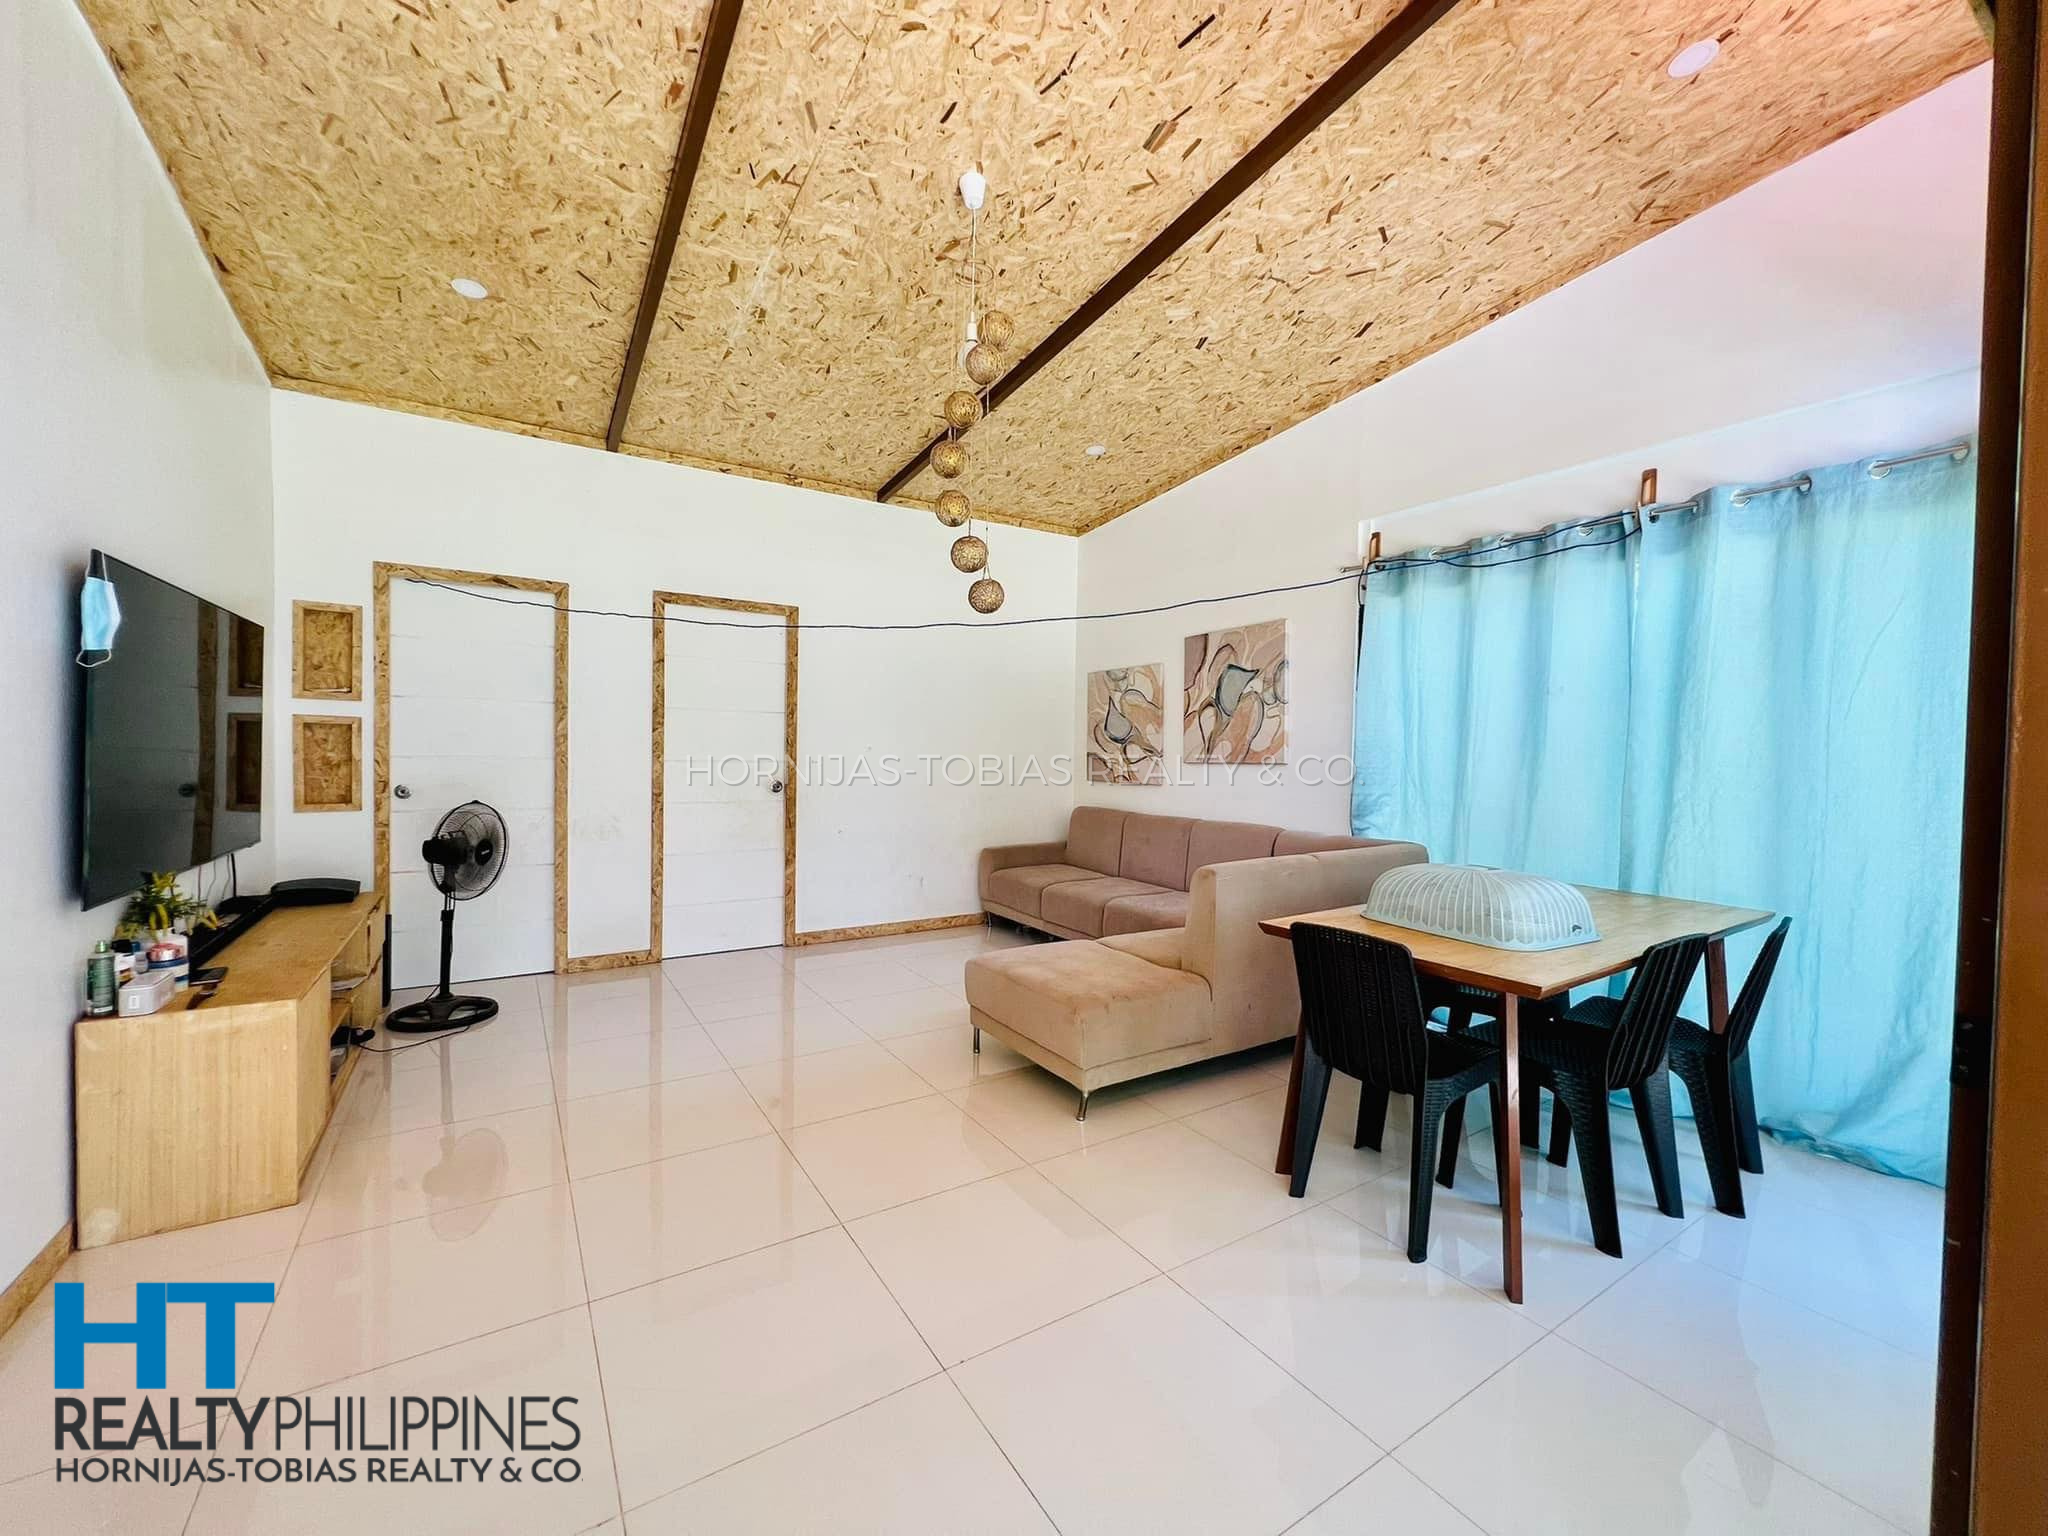 Living Area - For Sale - Inland Resort and Rest House in Binugao, Toril, Davao City